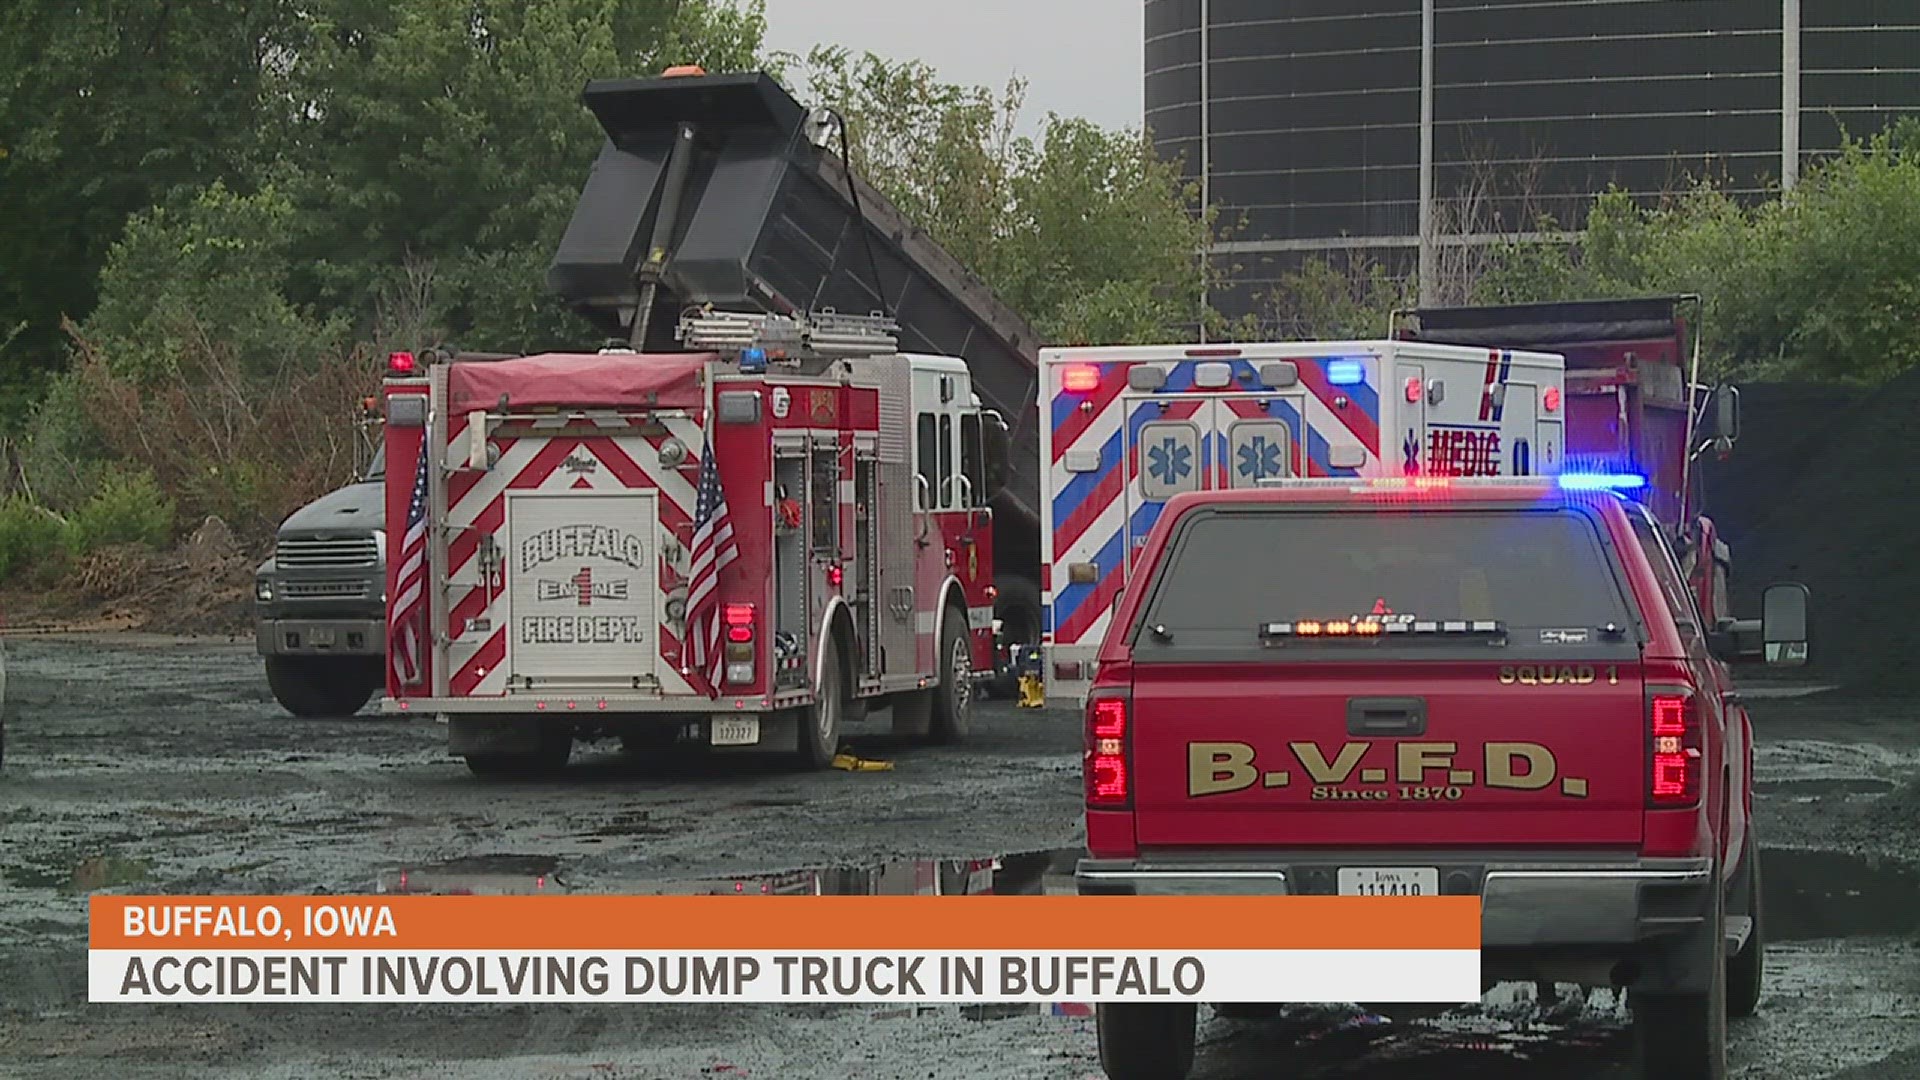 News 8 is still waiting for more information on the incident at the CHS Davenport Terminal in Buffalo.